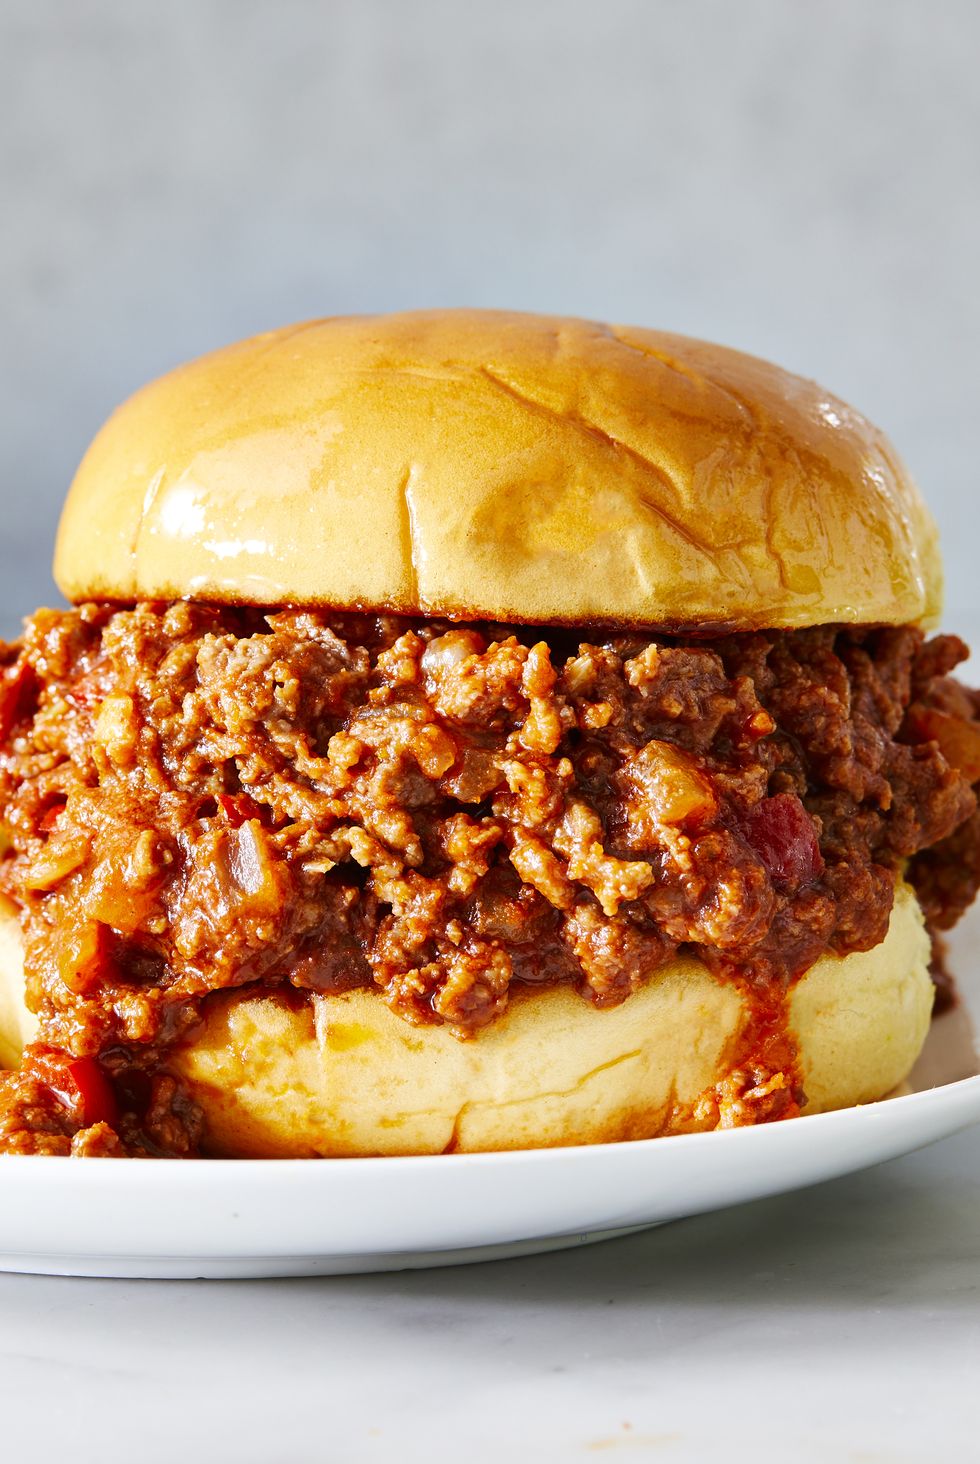 sloppy joes served on a toasted bun with chips